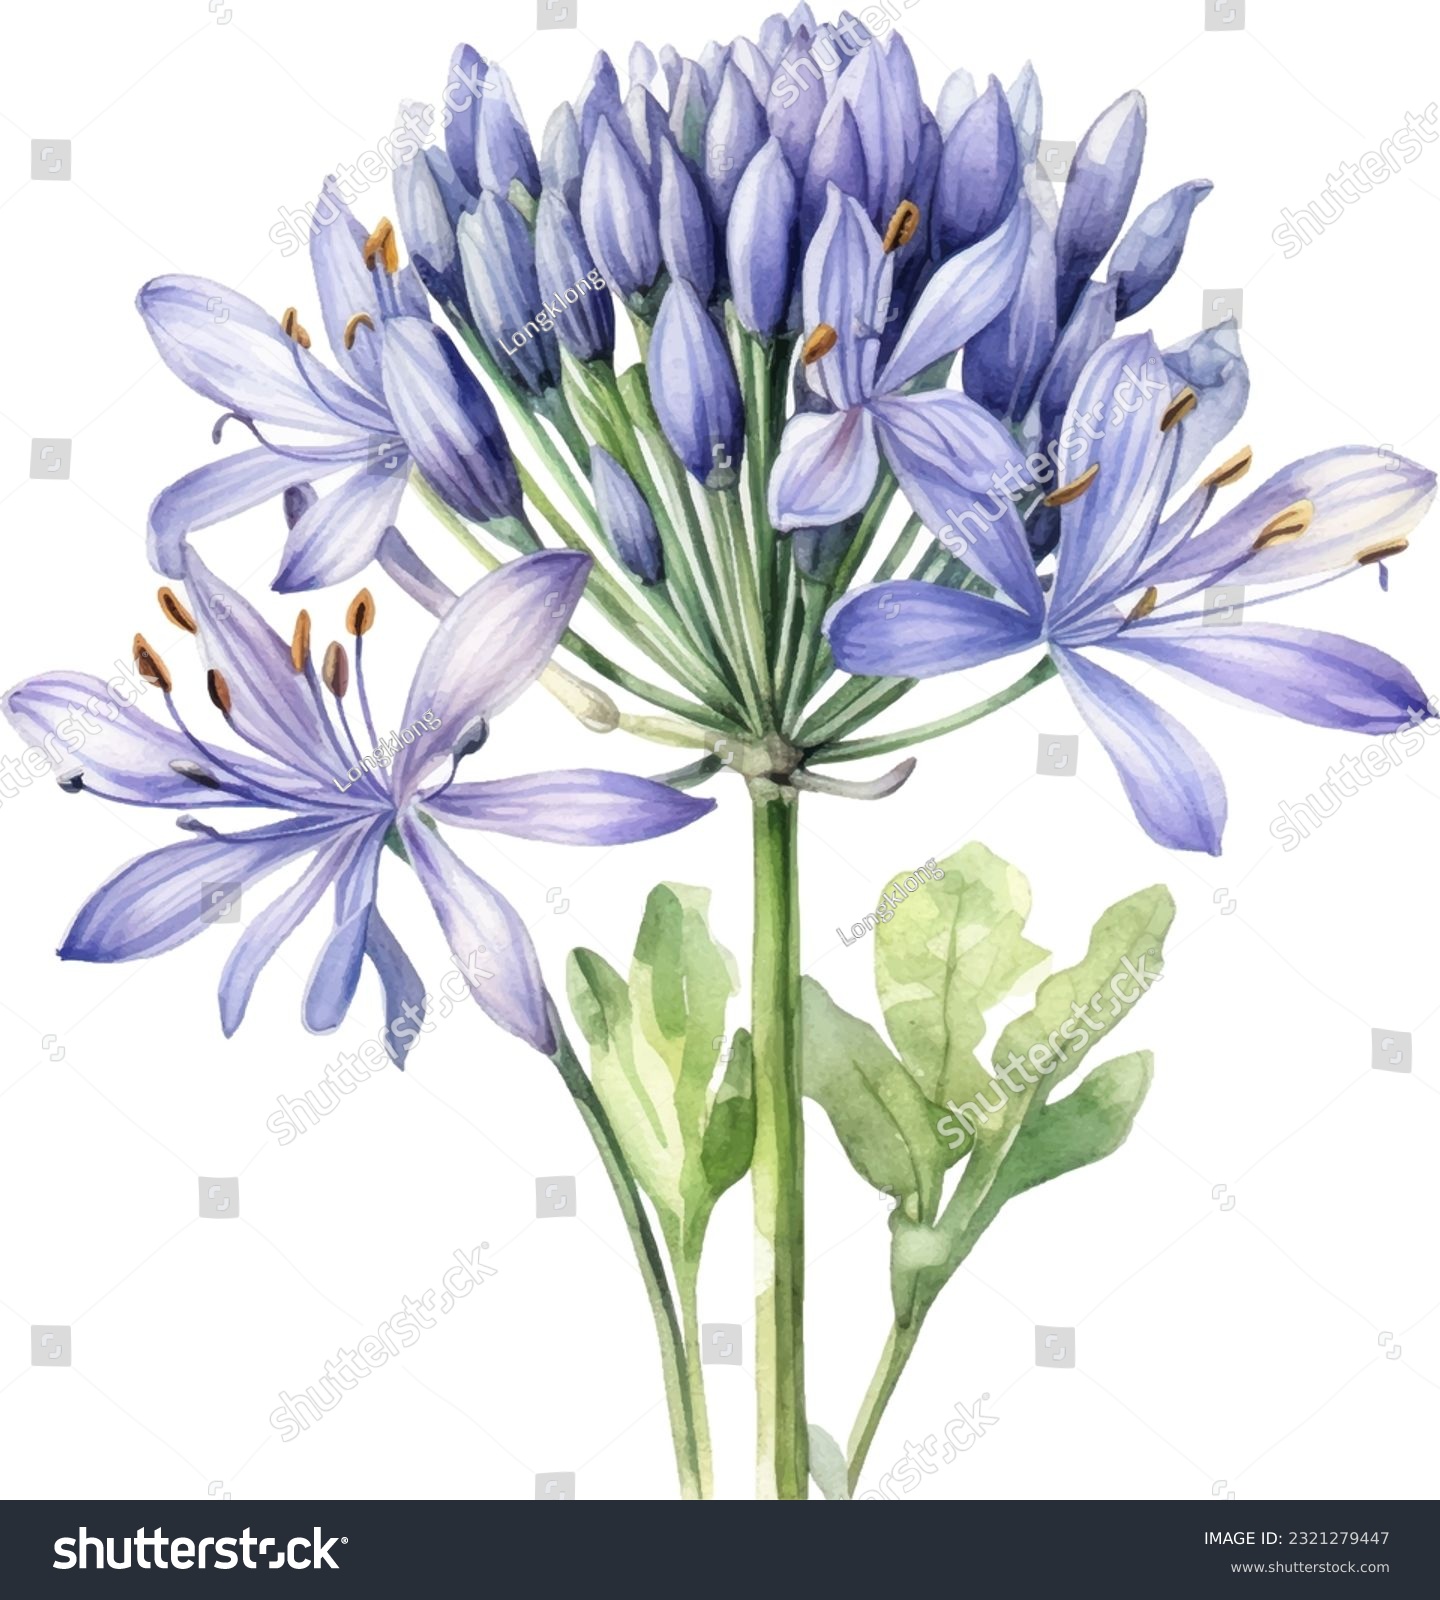 SVG of Agapanthus Watercolor illustration. Hand drawn underwater element design. Artistic vector marine design element. Illustration for greeting cards, printing and other design projects. svg